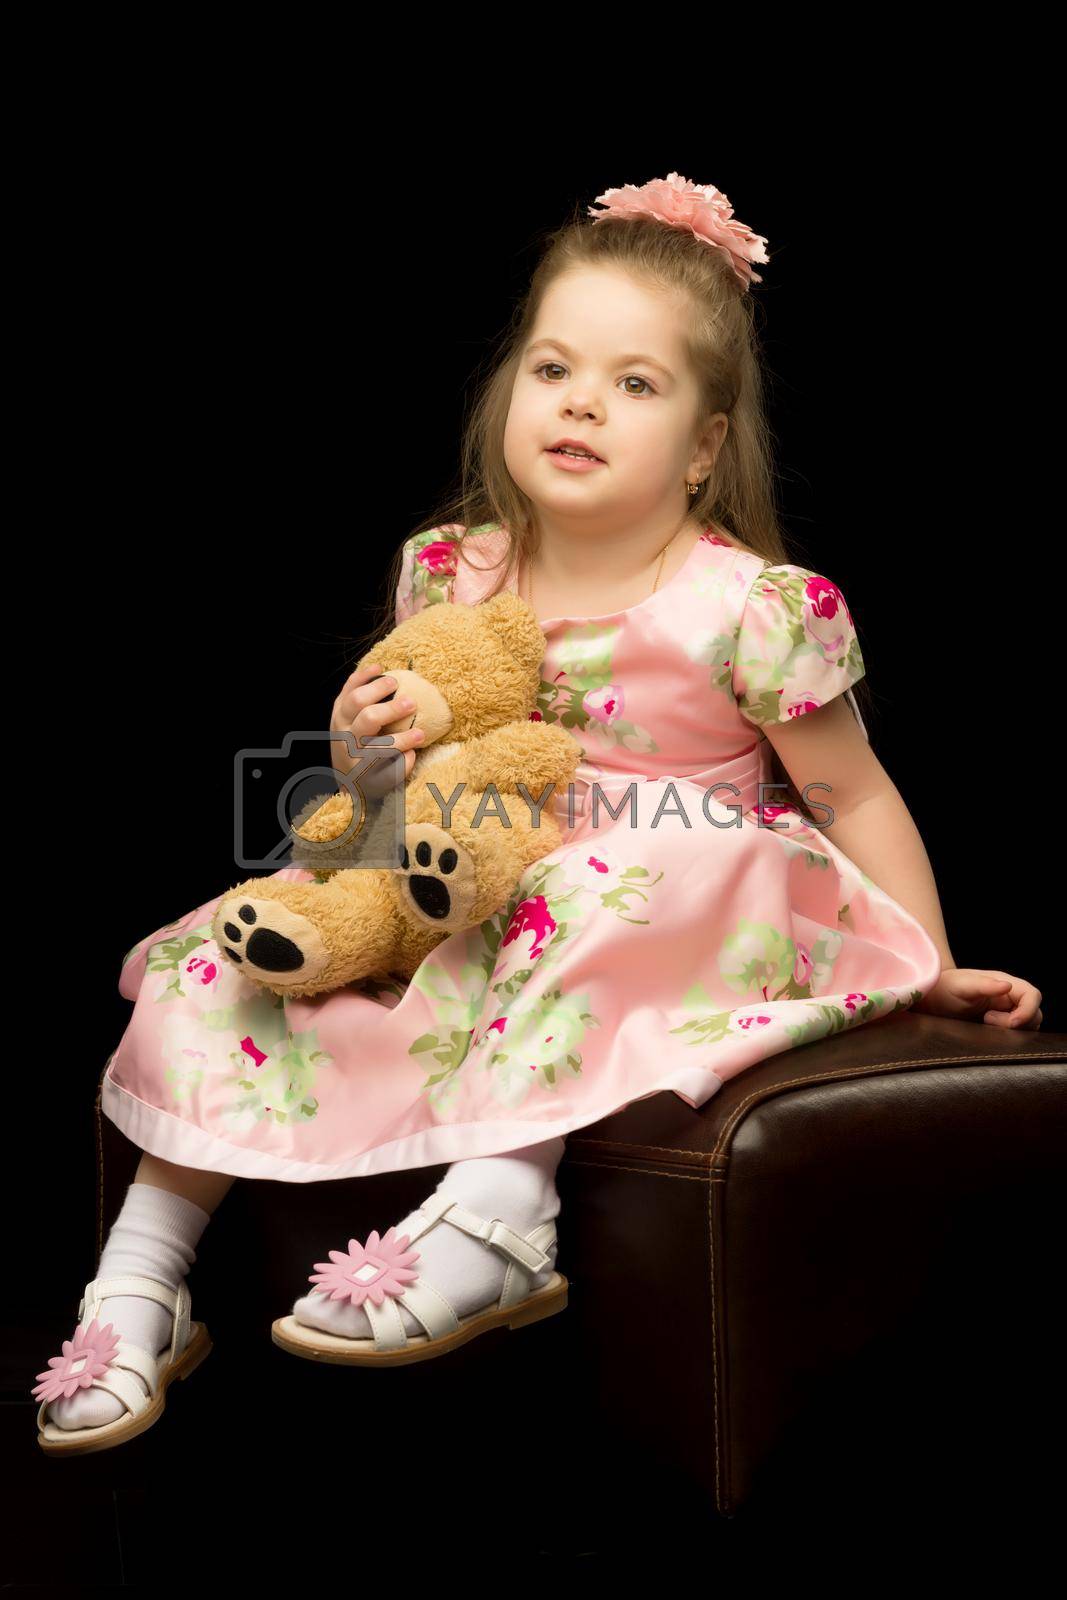 Royalty free image of Little girl with a teddy bear on a black background. by kolesnikov_studio